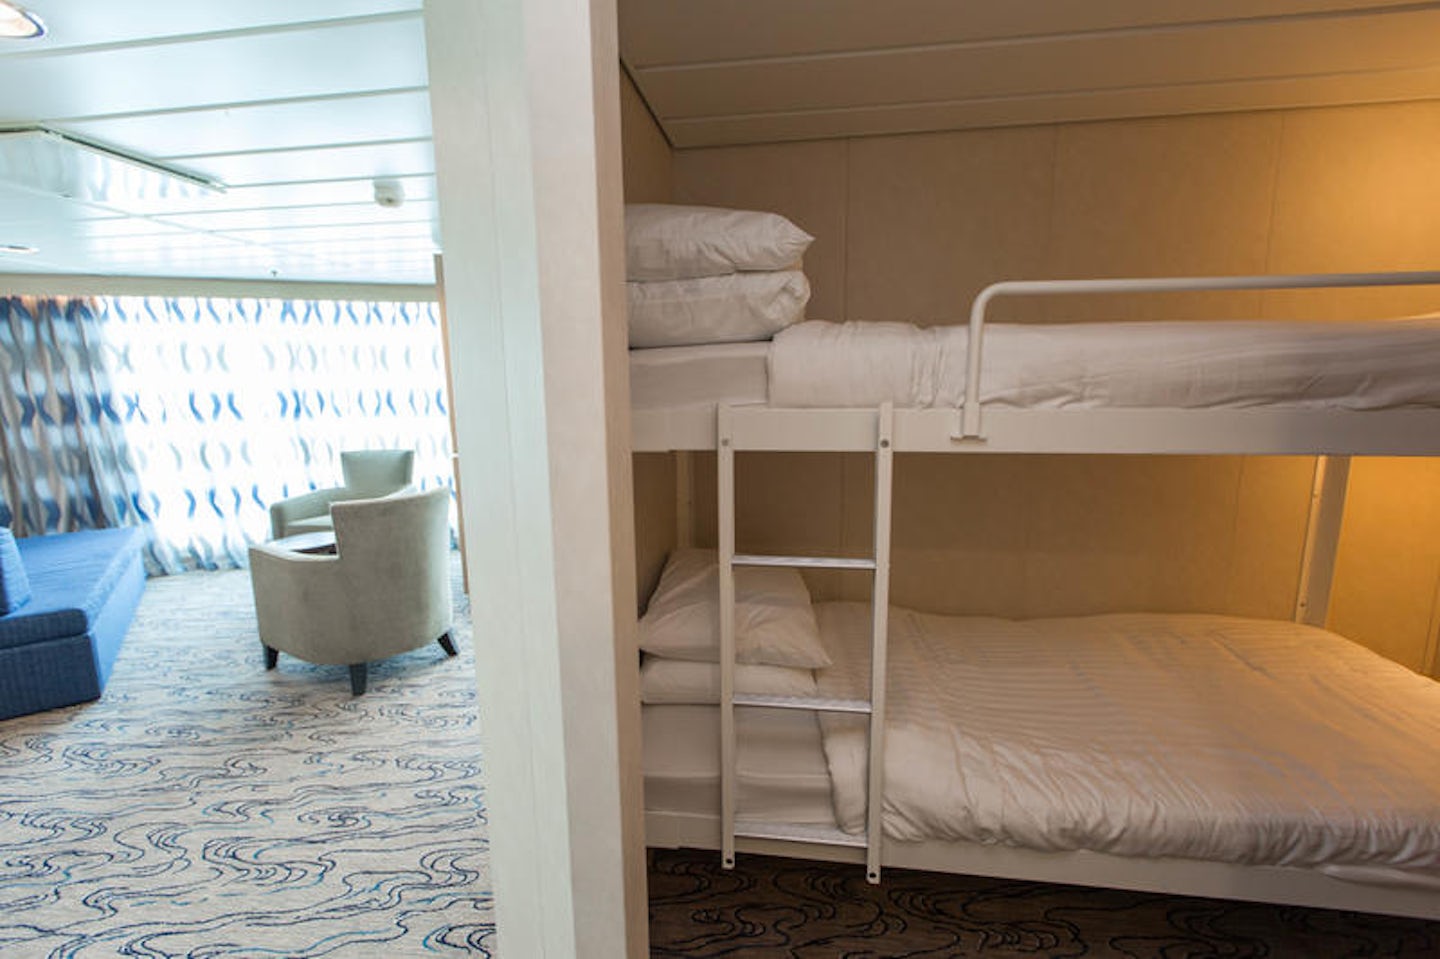 The Family Panoramic Oceanview Cabin on Liberty of the Seas